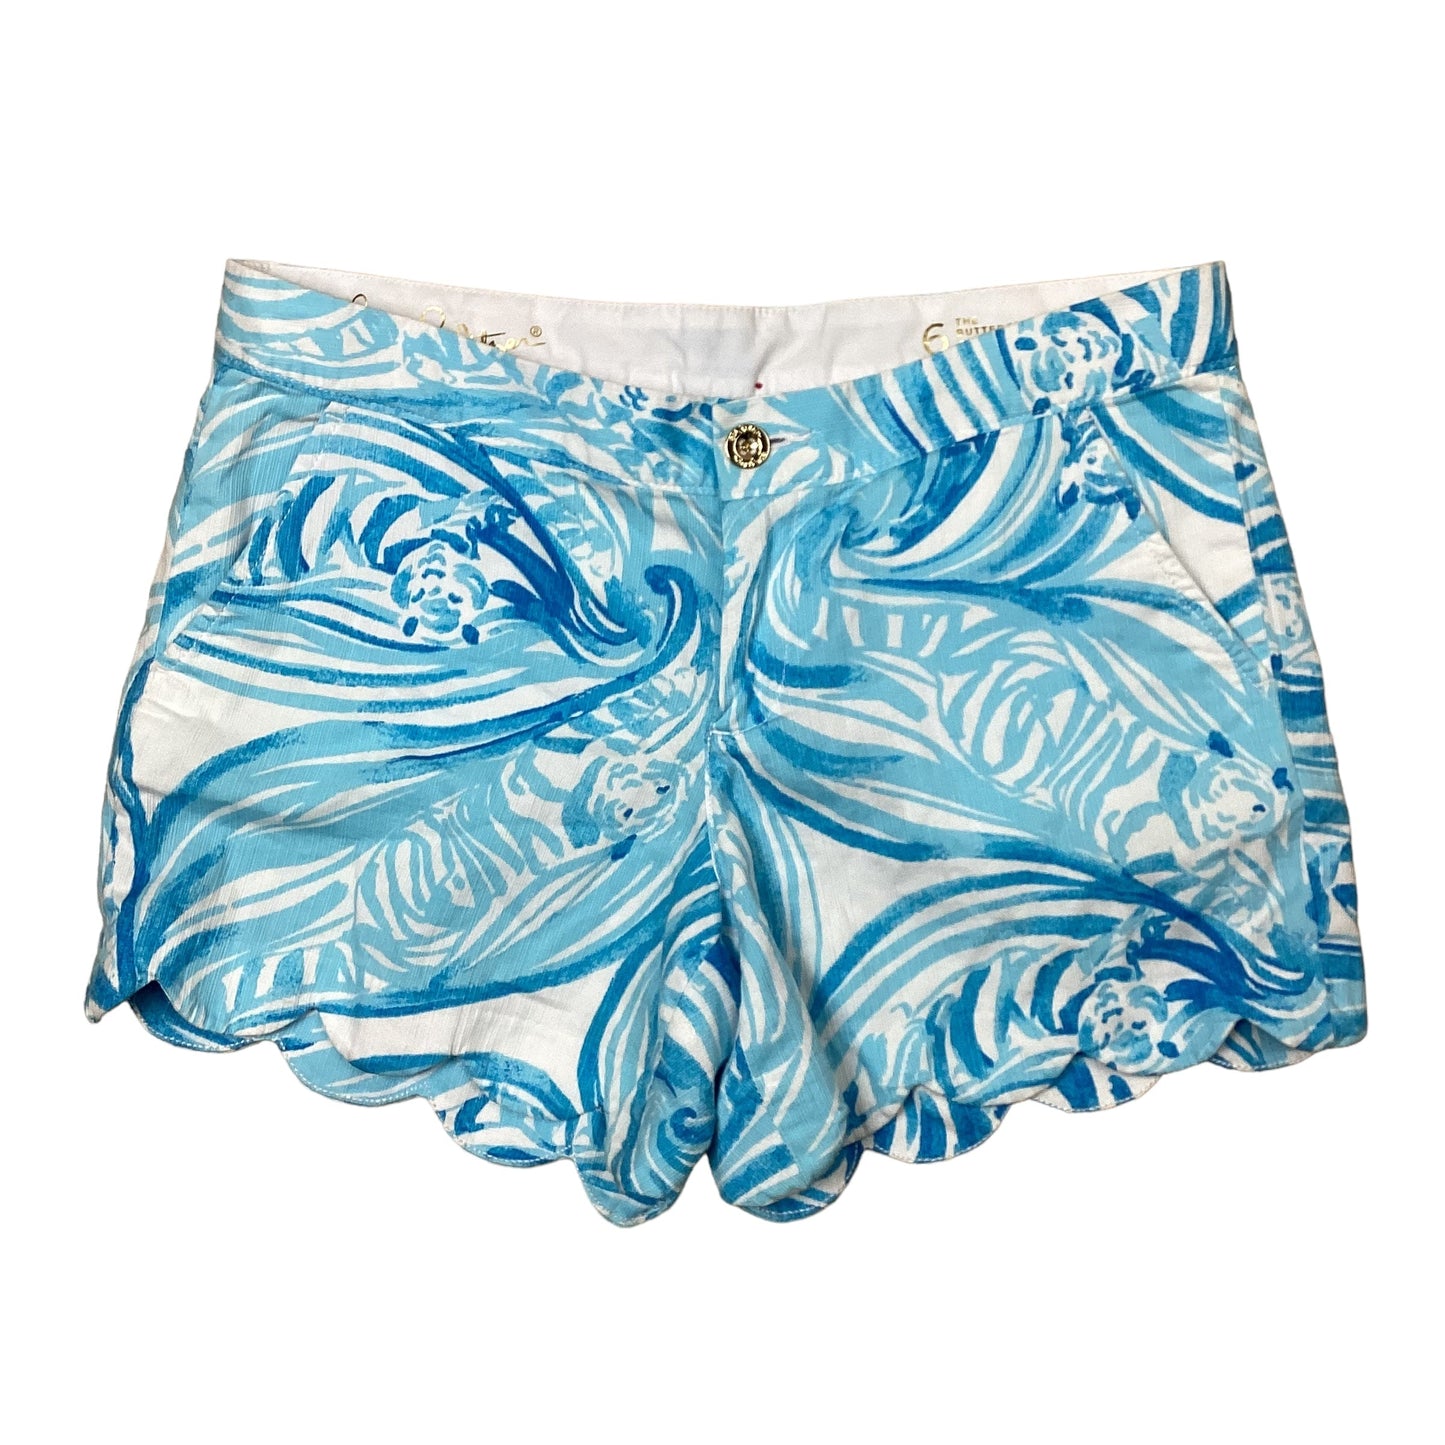 Blue Shorts Lilly Pulitzer, Size 6